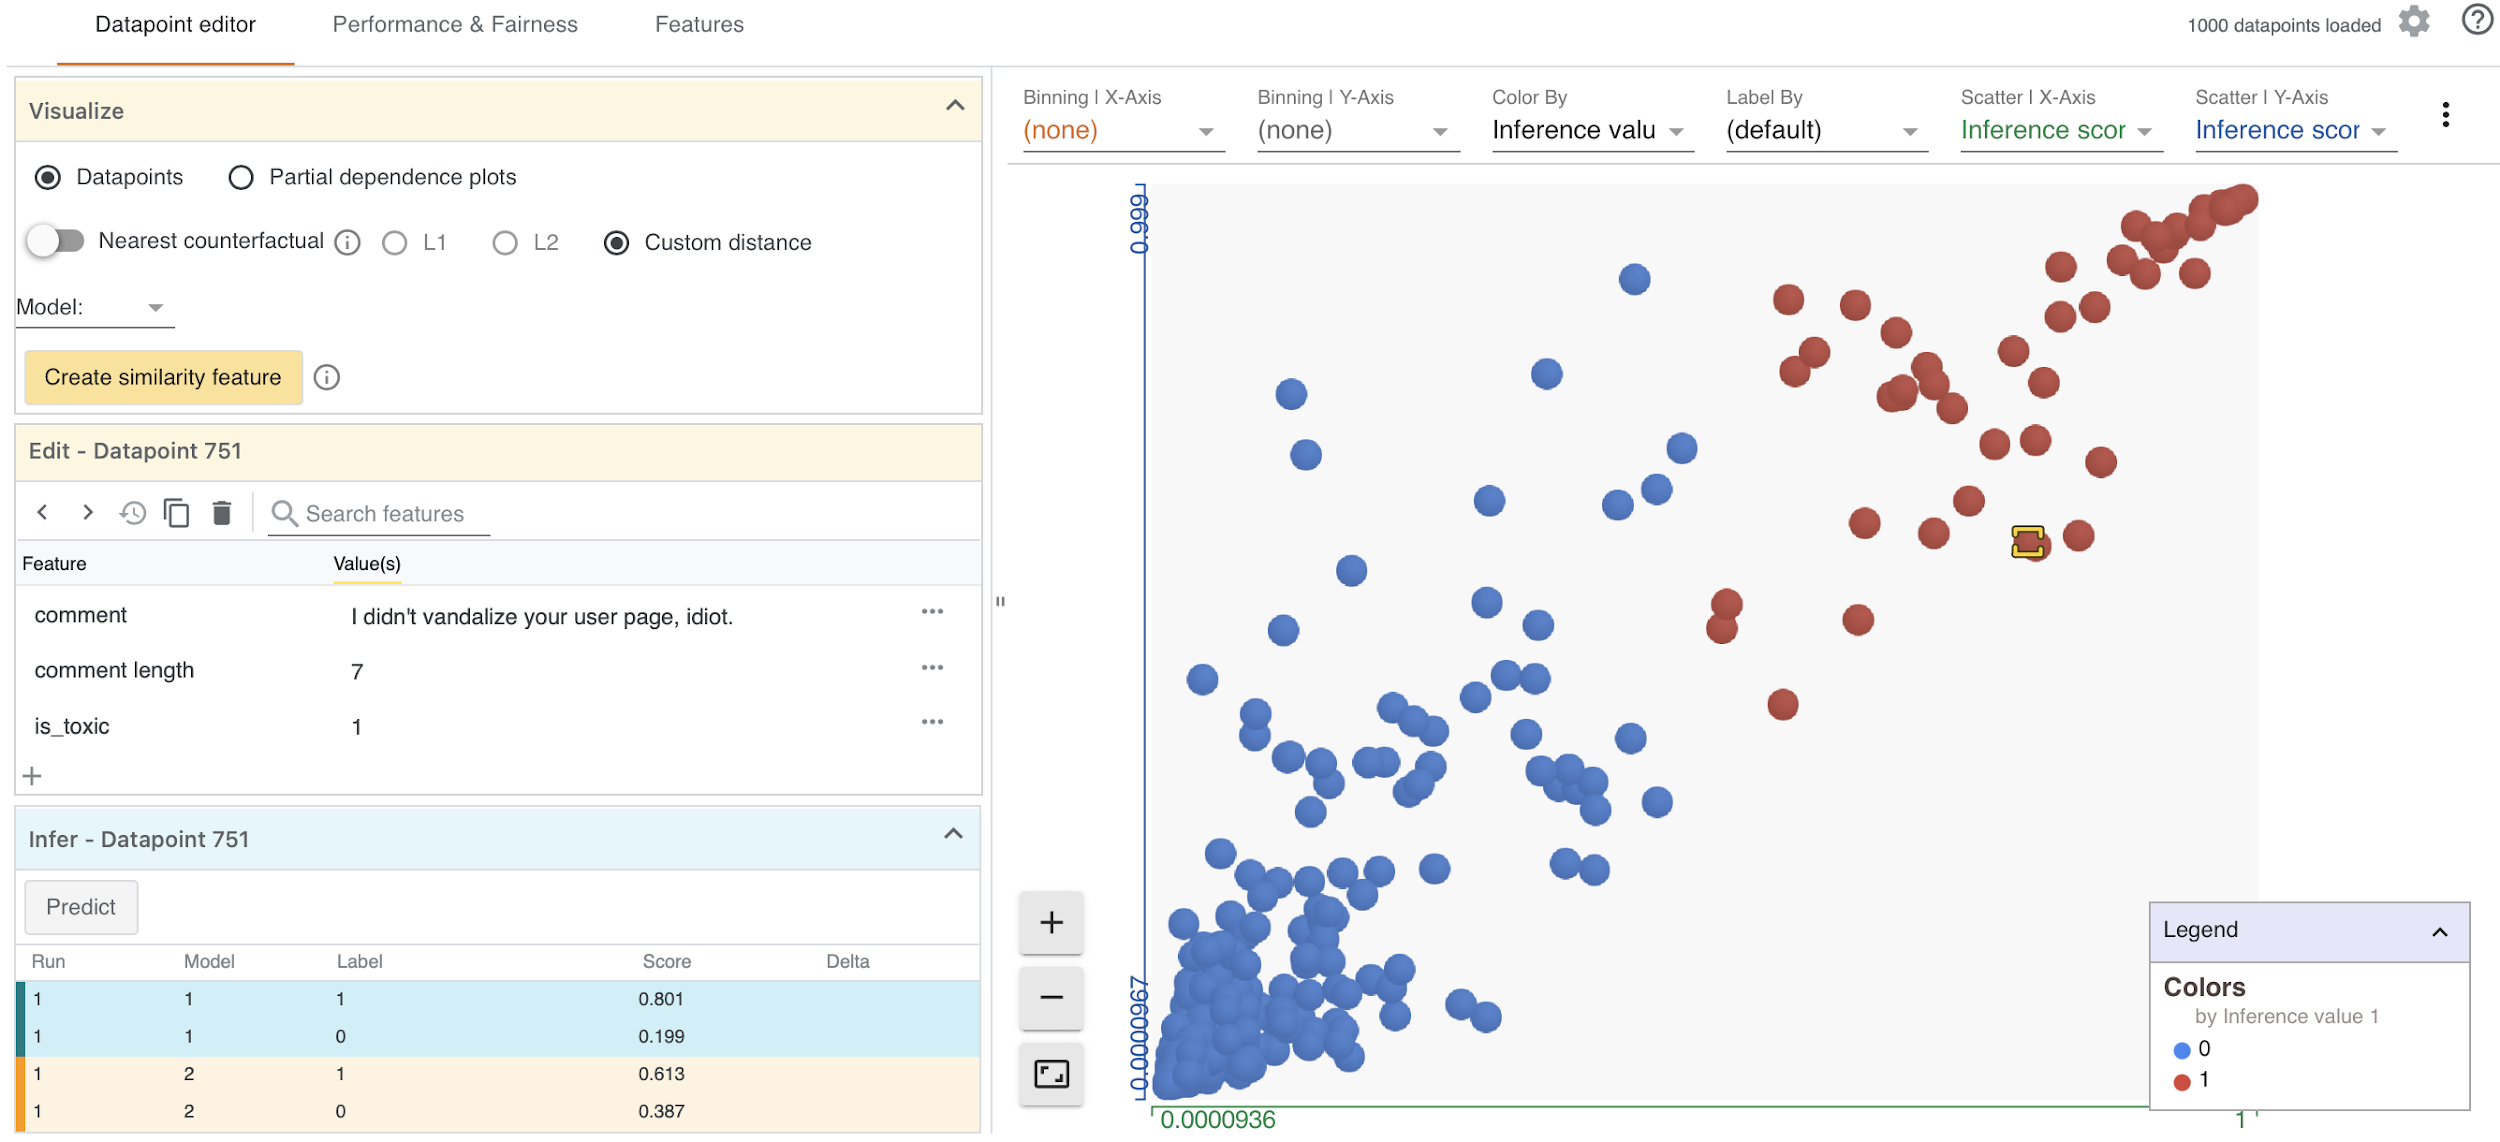 Screenshot of dataviz interface with configuration on left and scatterplot
                  on right.